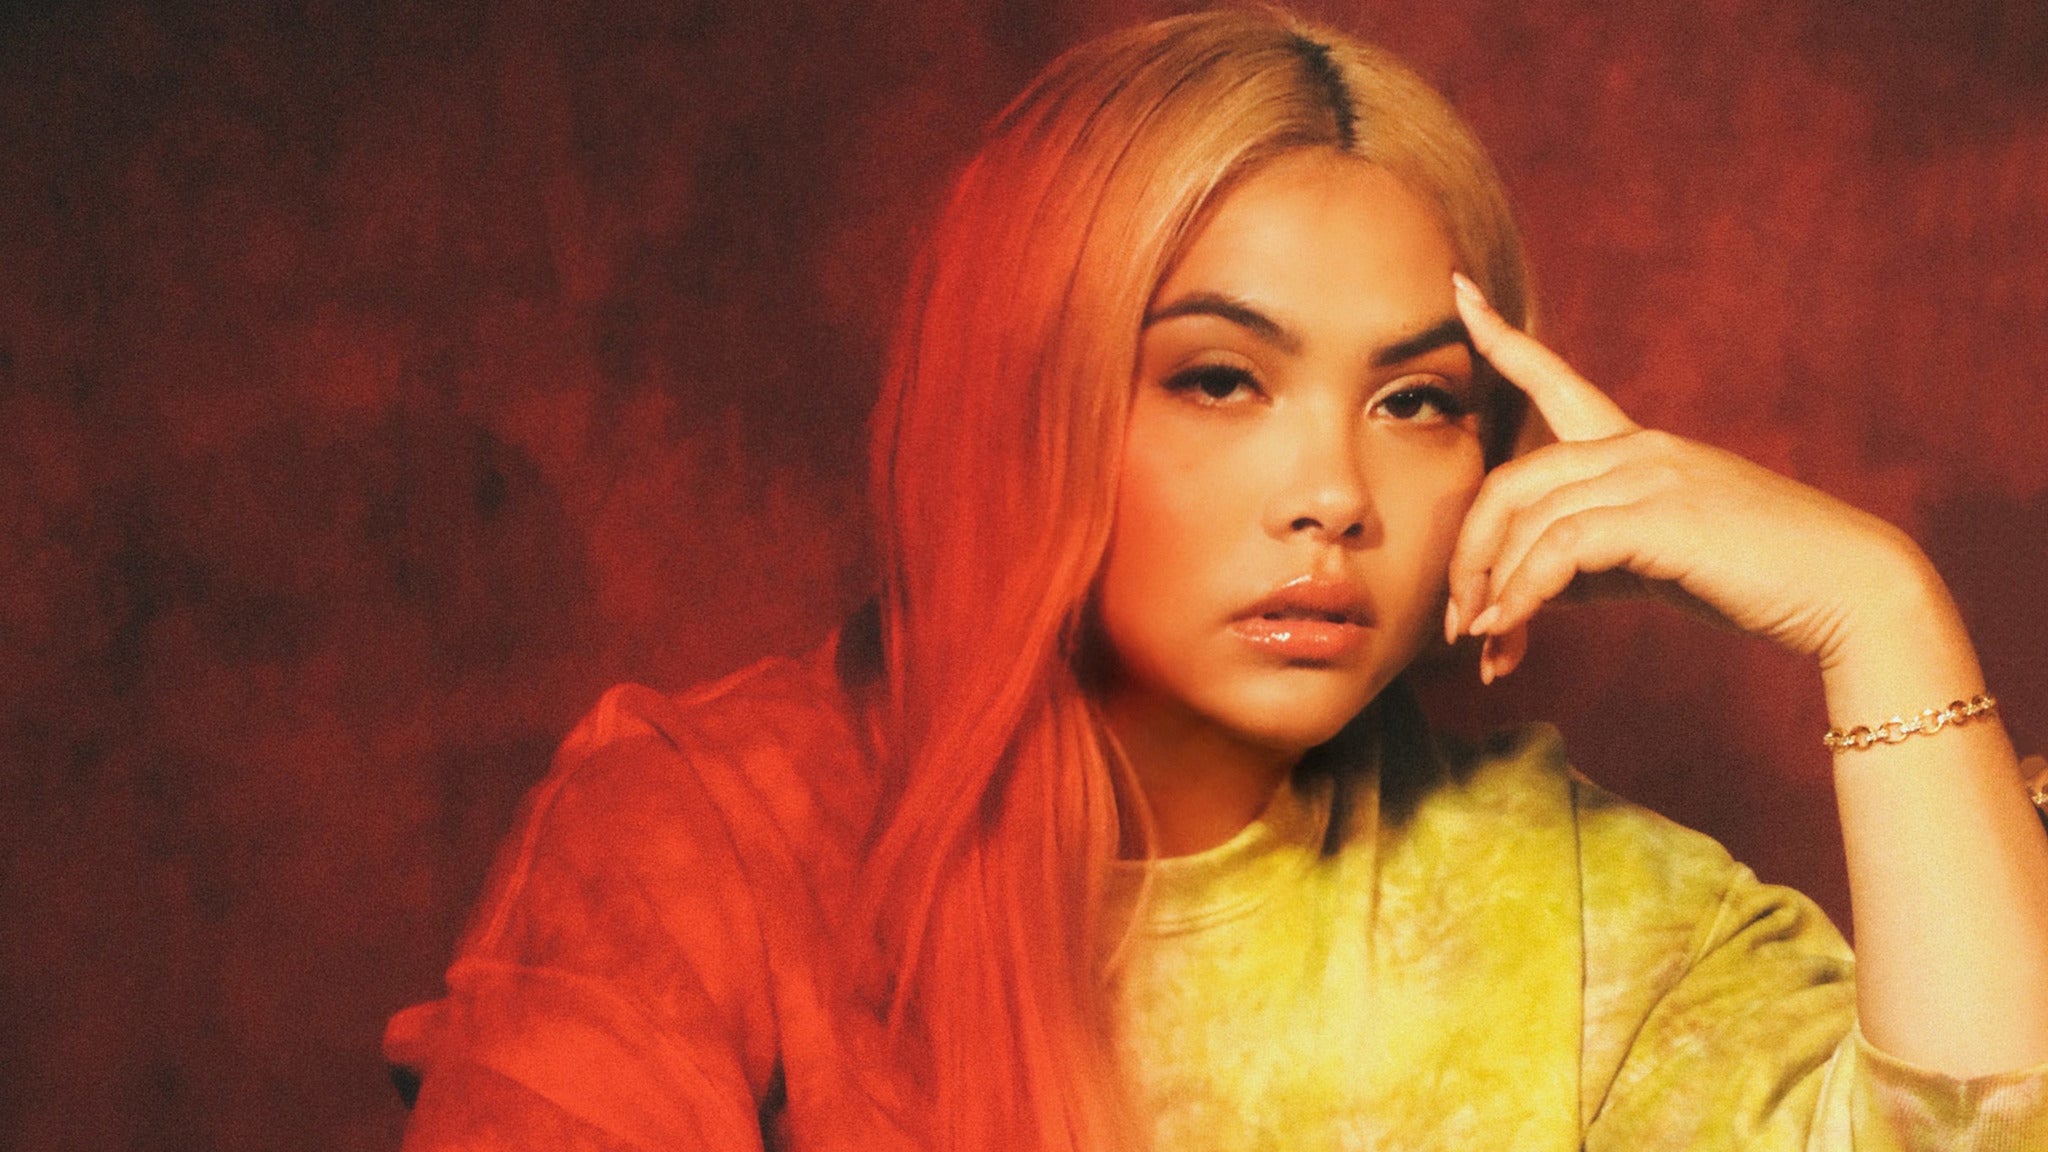 Hayley Kiyoko - Expectations North American Tour in Toronto promo photo for Live Nation presale offer code